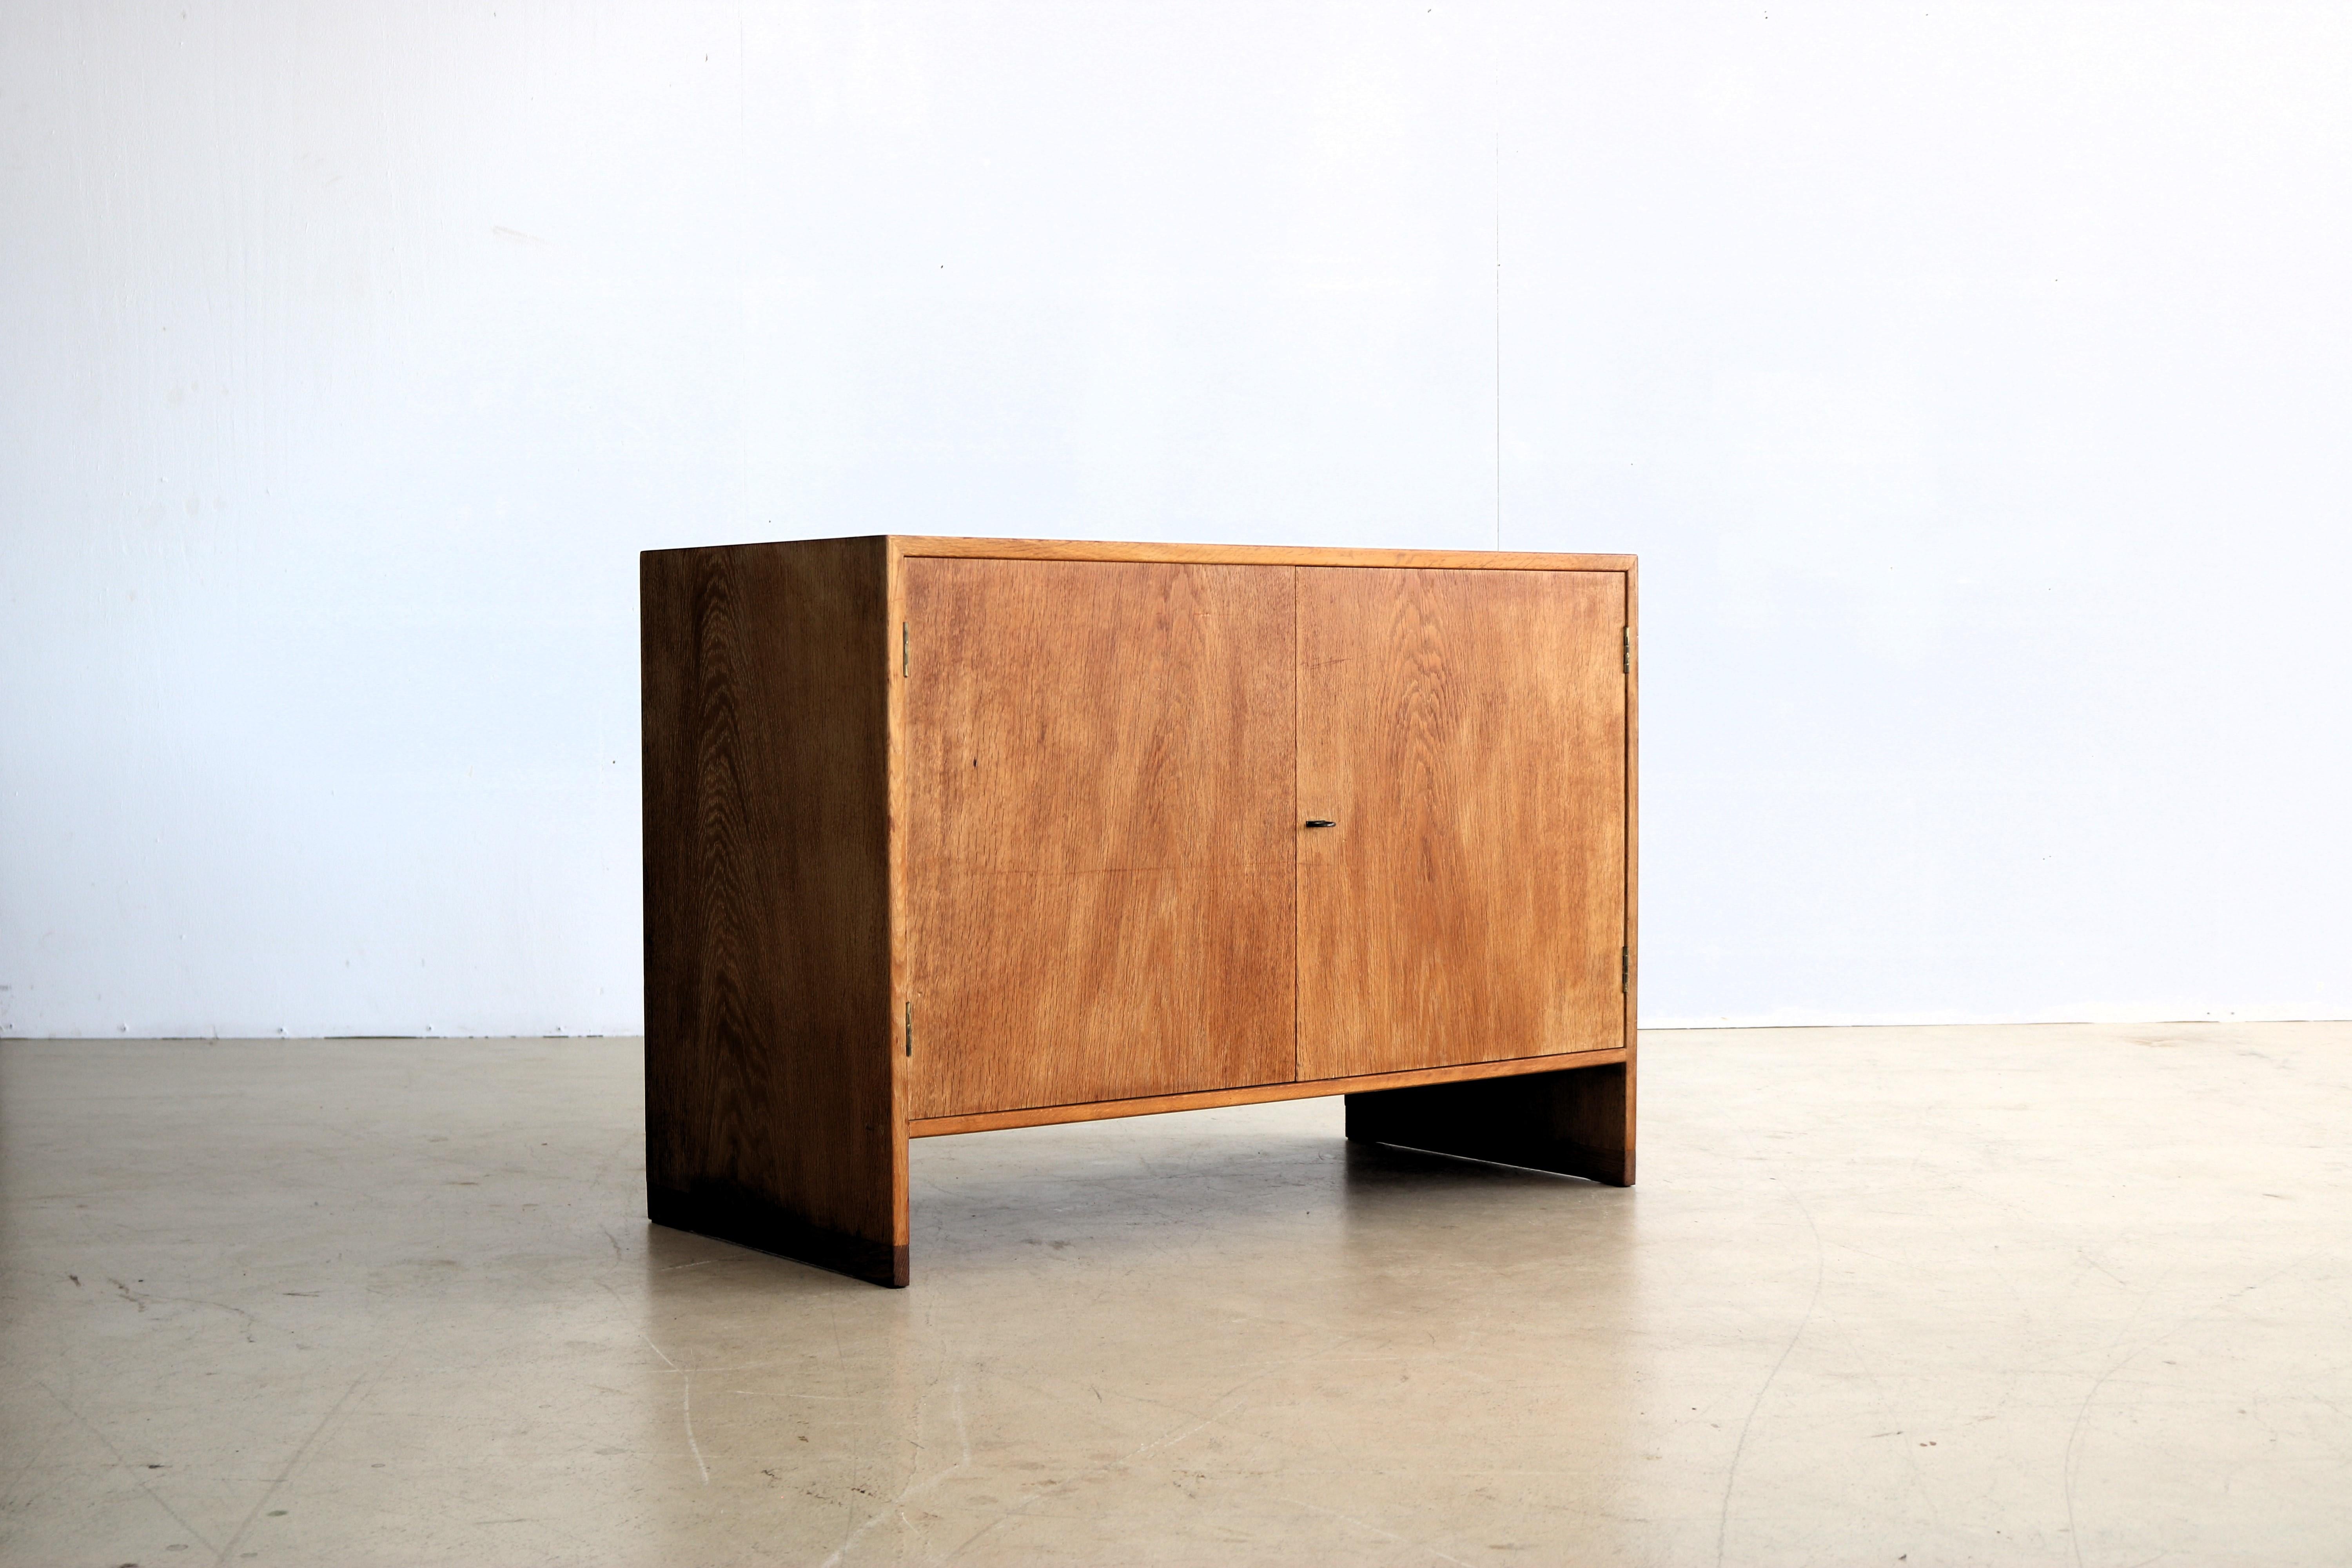 vintage cabinet sideboard Hans Wegner R.Y. Mobler

period 1950s
designs Hans Wegner R.Y. Mobler Denmark
conditions good light signs of use color difference on top
size 71 x 100 x 49 (hxwxd)

details teak; oak;

article number 2035.